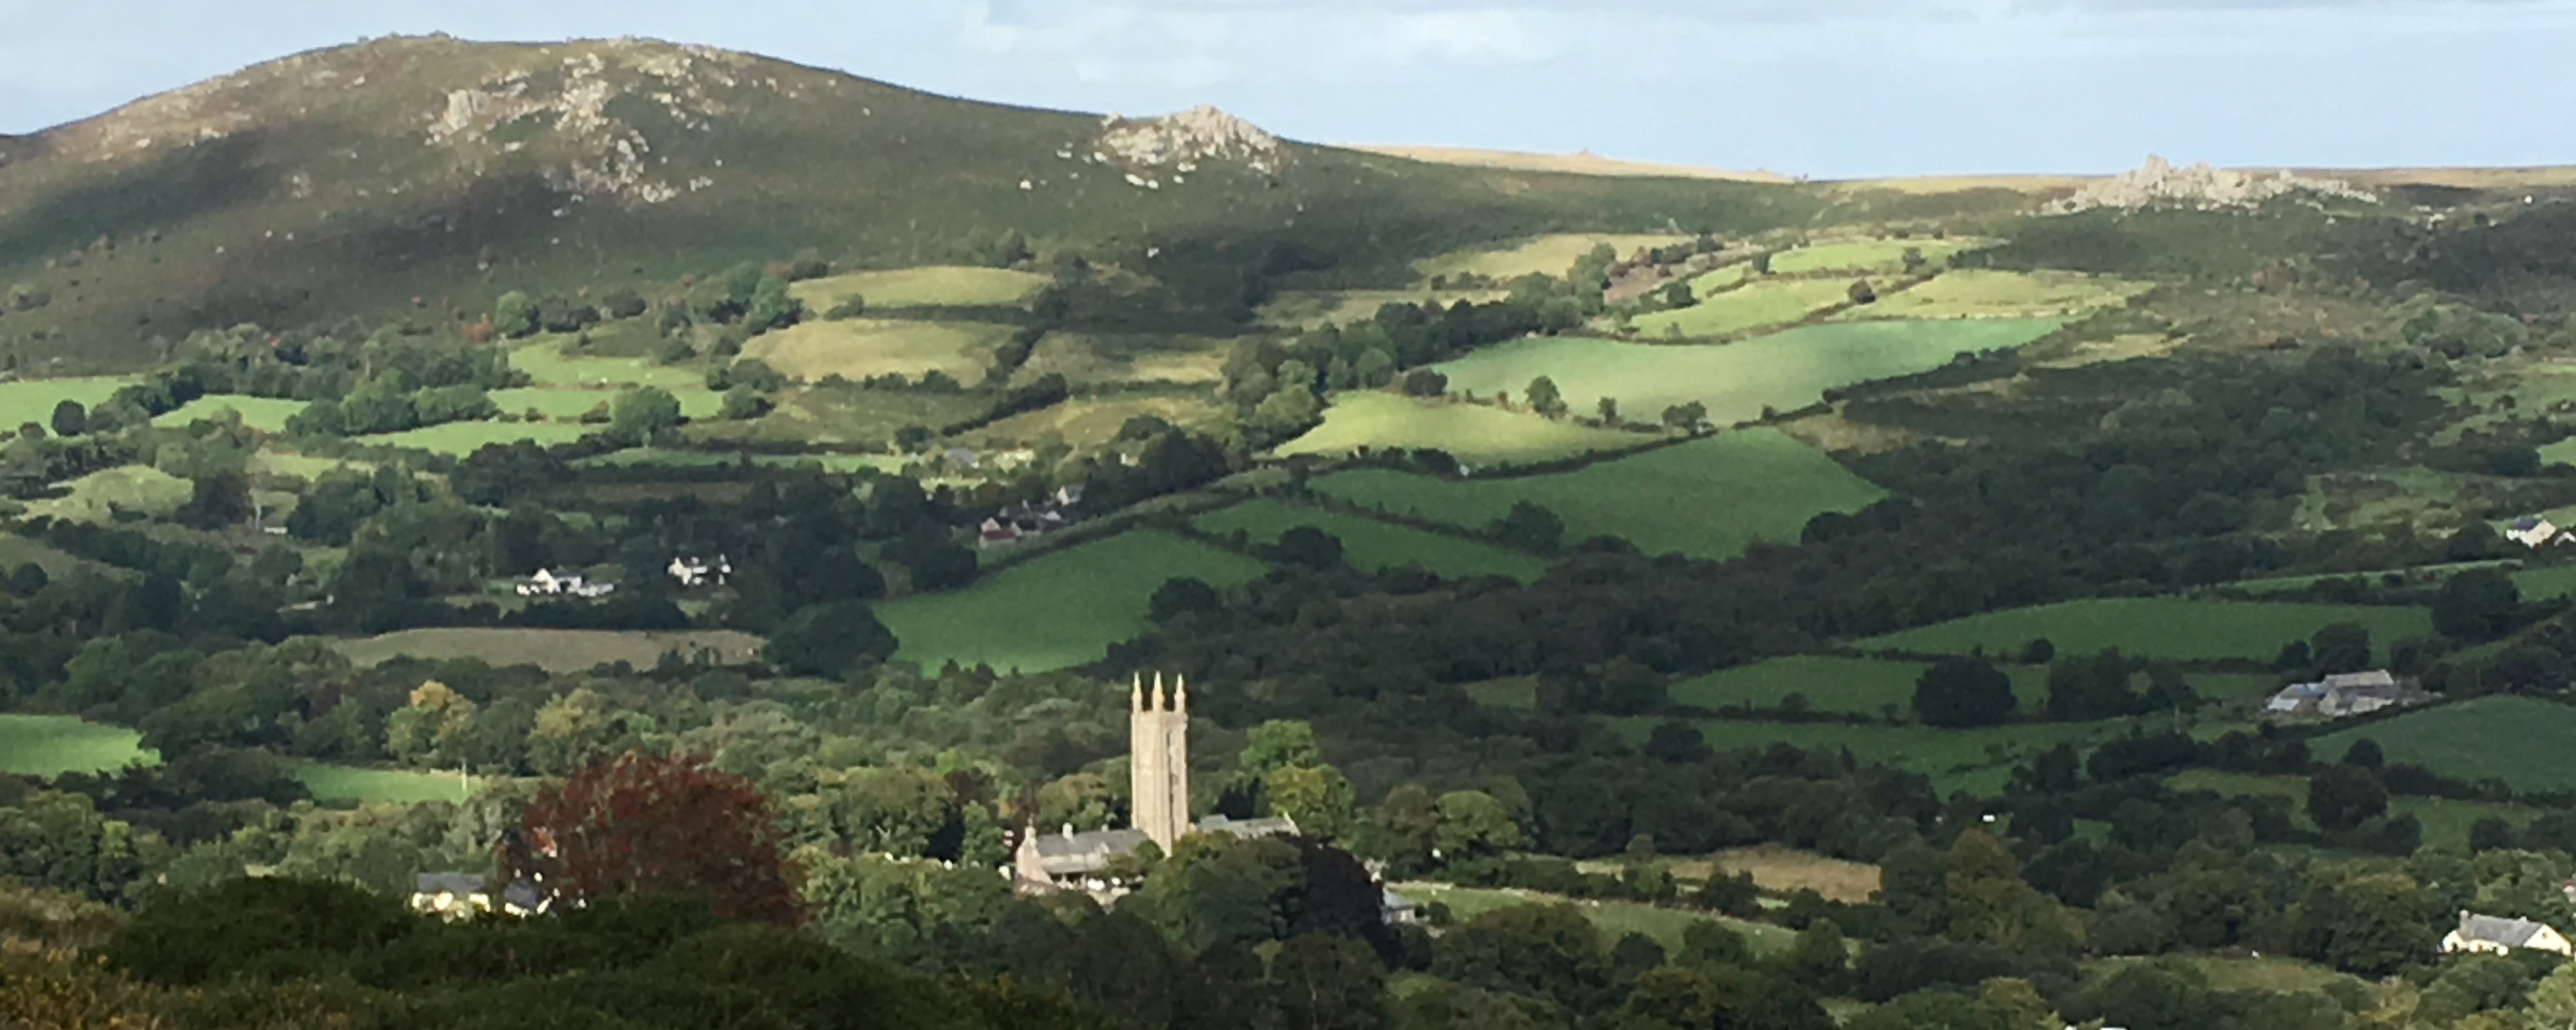 Widecombe Village with Chinkwell Tor, Bel Tor and Bonehill Rocks in the Background